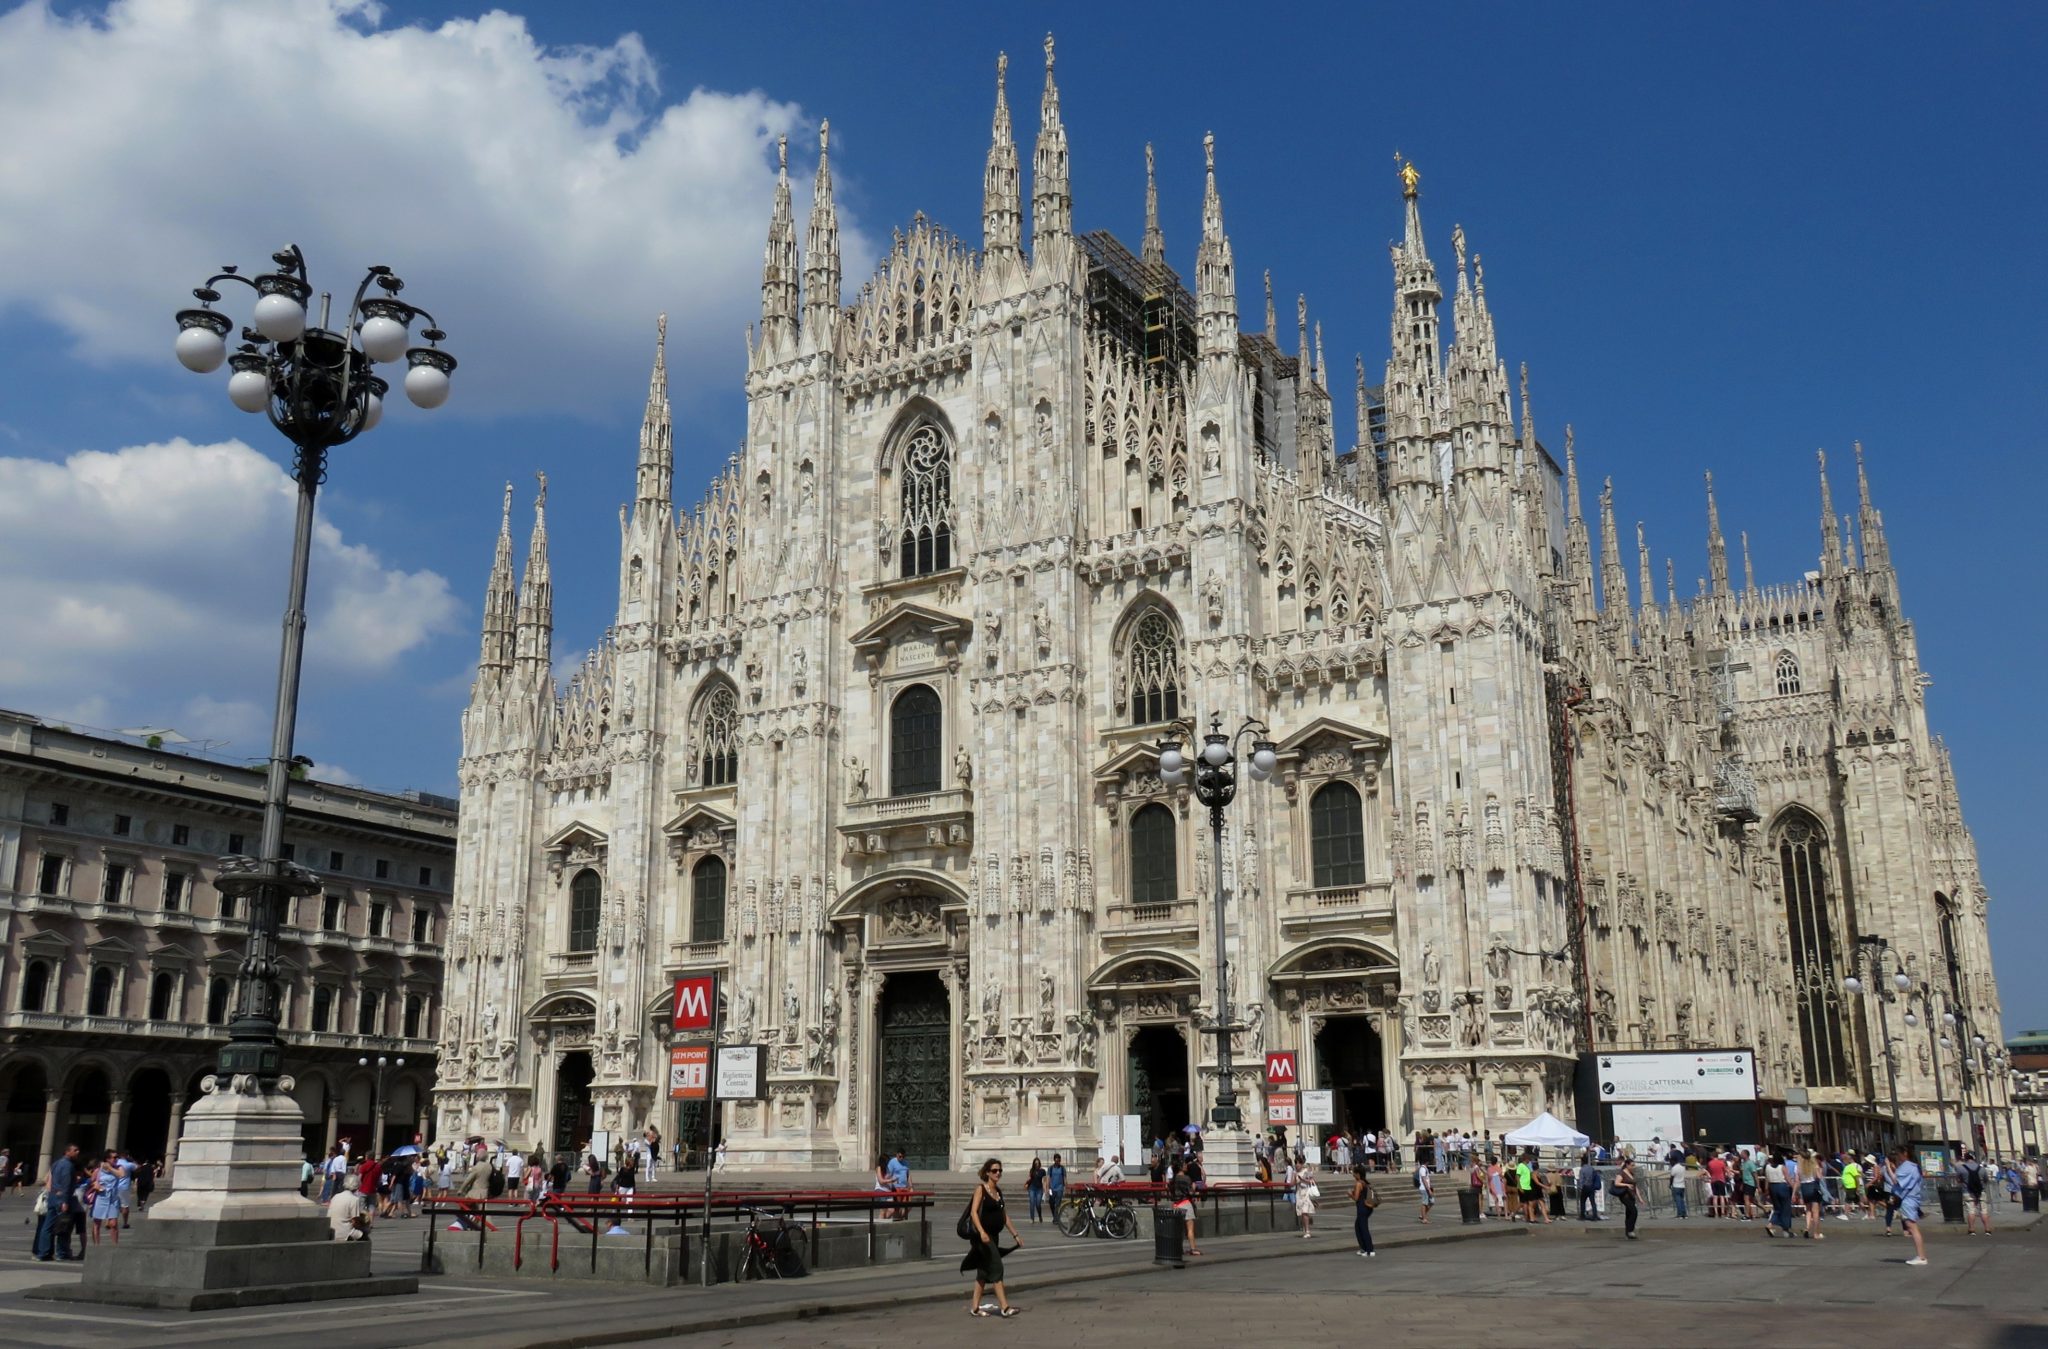 Milan Cathedral, History, Description, & Facts